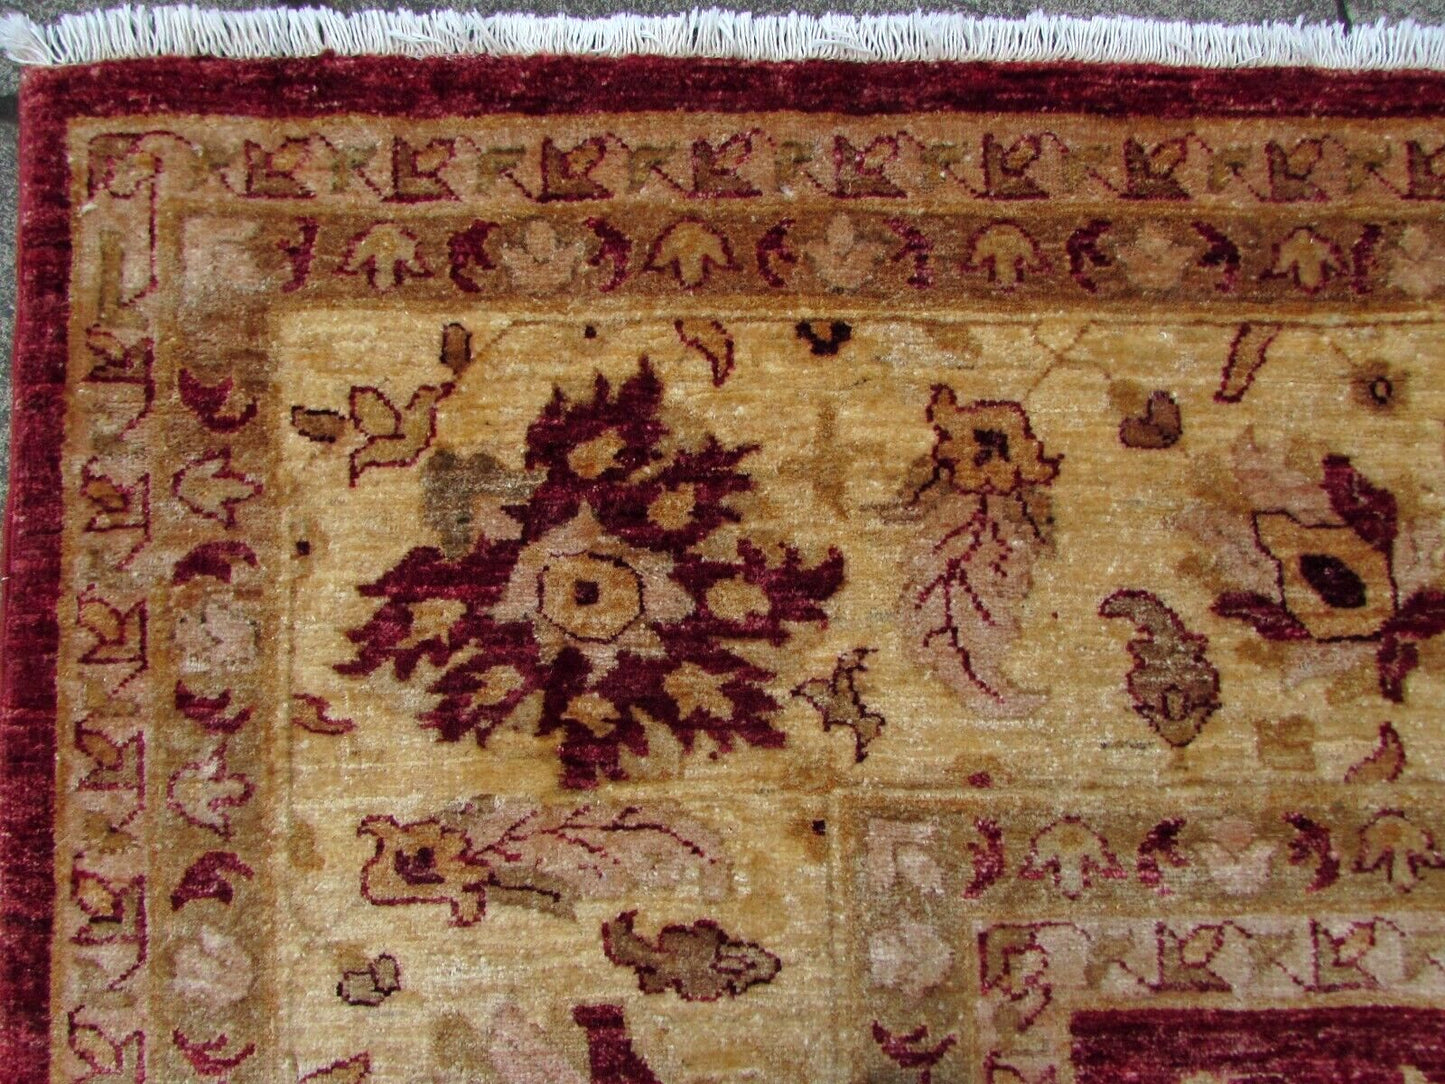 Detailed view of the ruby red background color on the rug